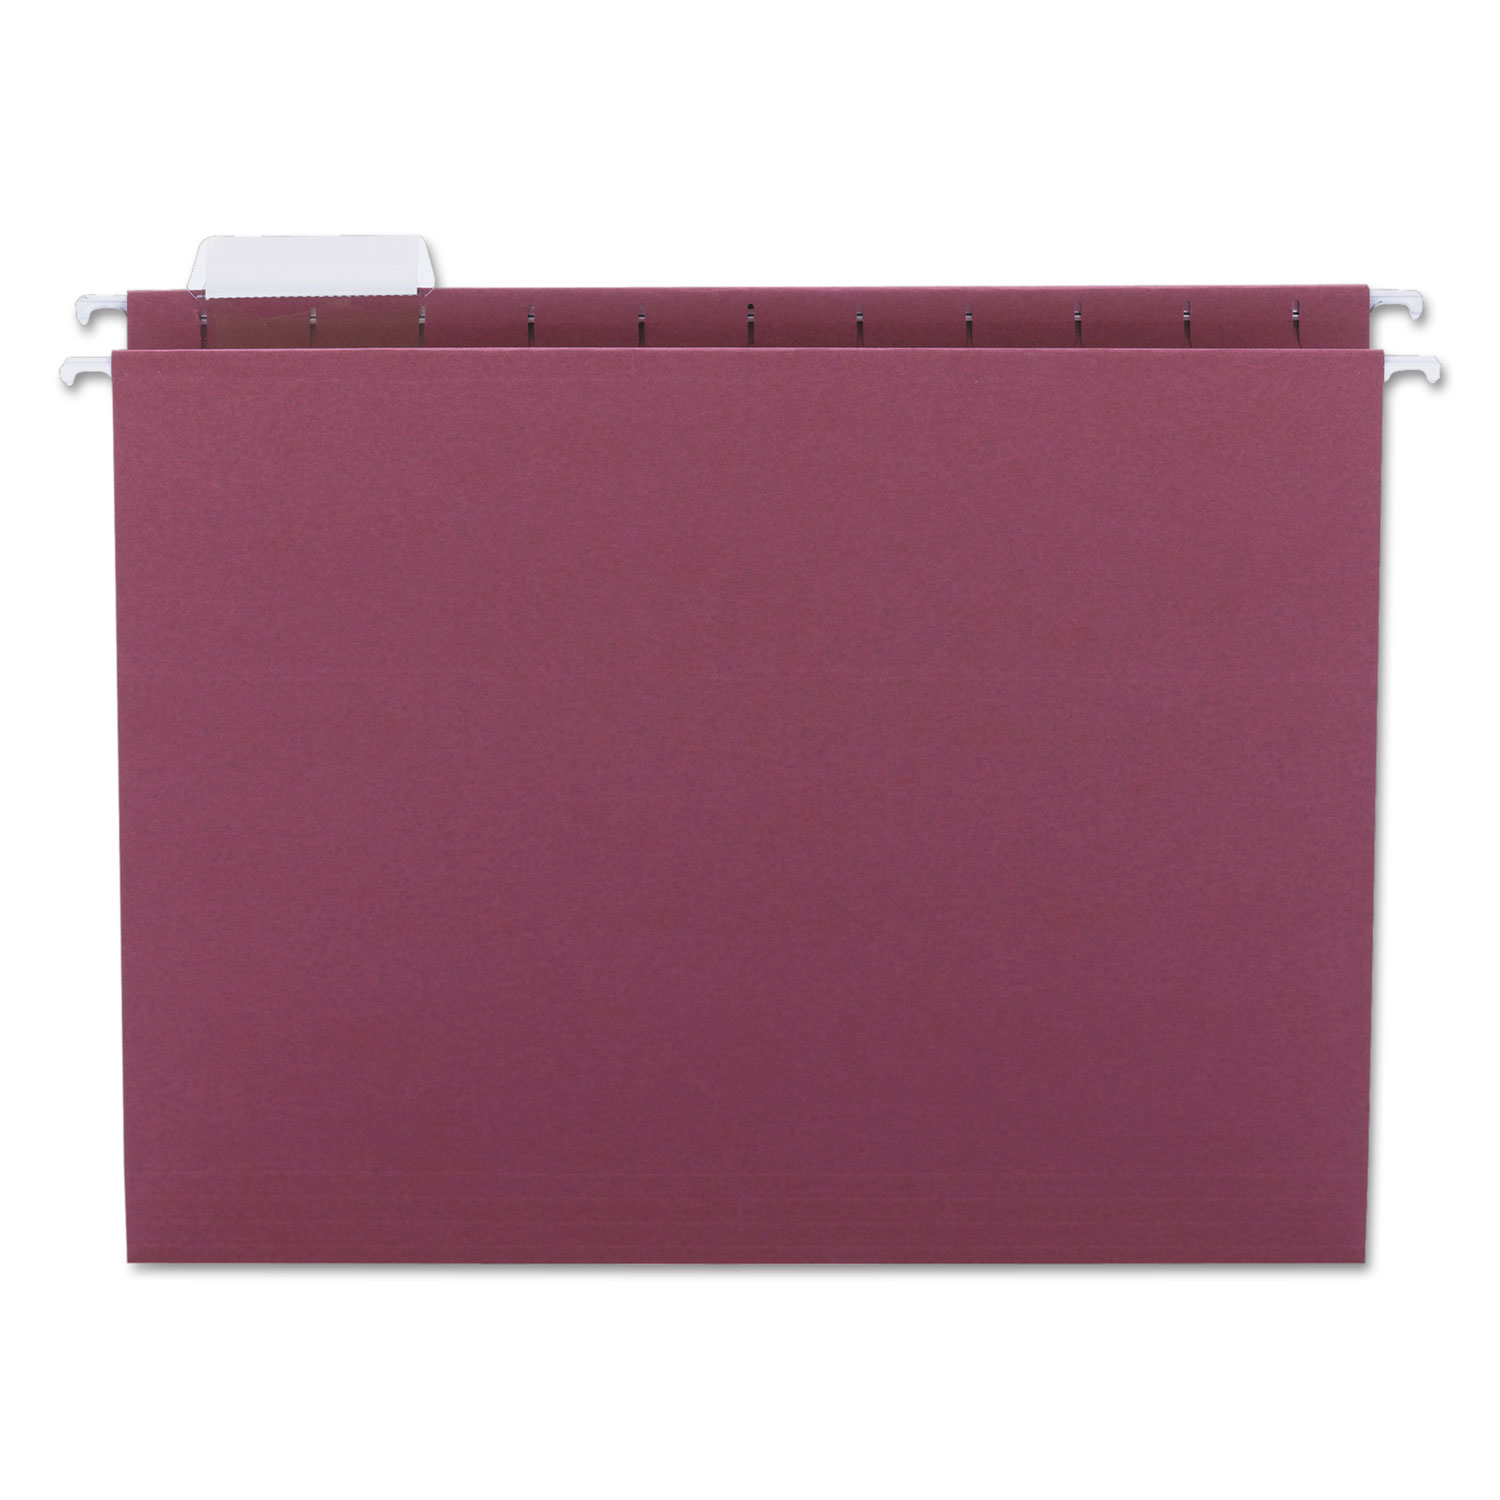  Smead 64073 Colored Hanging File Folders, Letter Size, 1/5-Cut Tab, Maroon, 25/Box (SMD64073) 